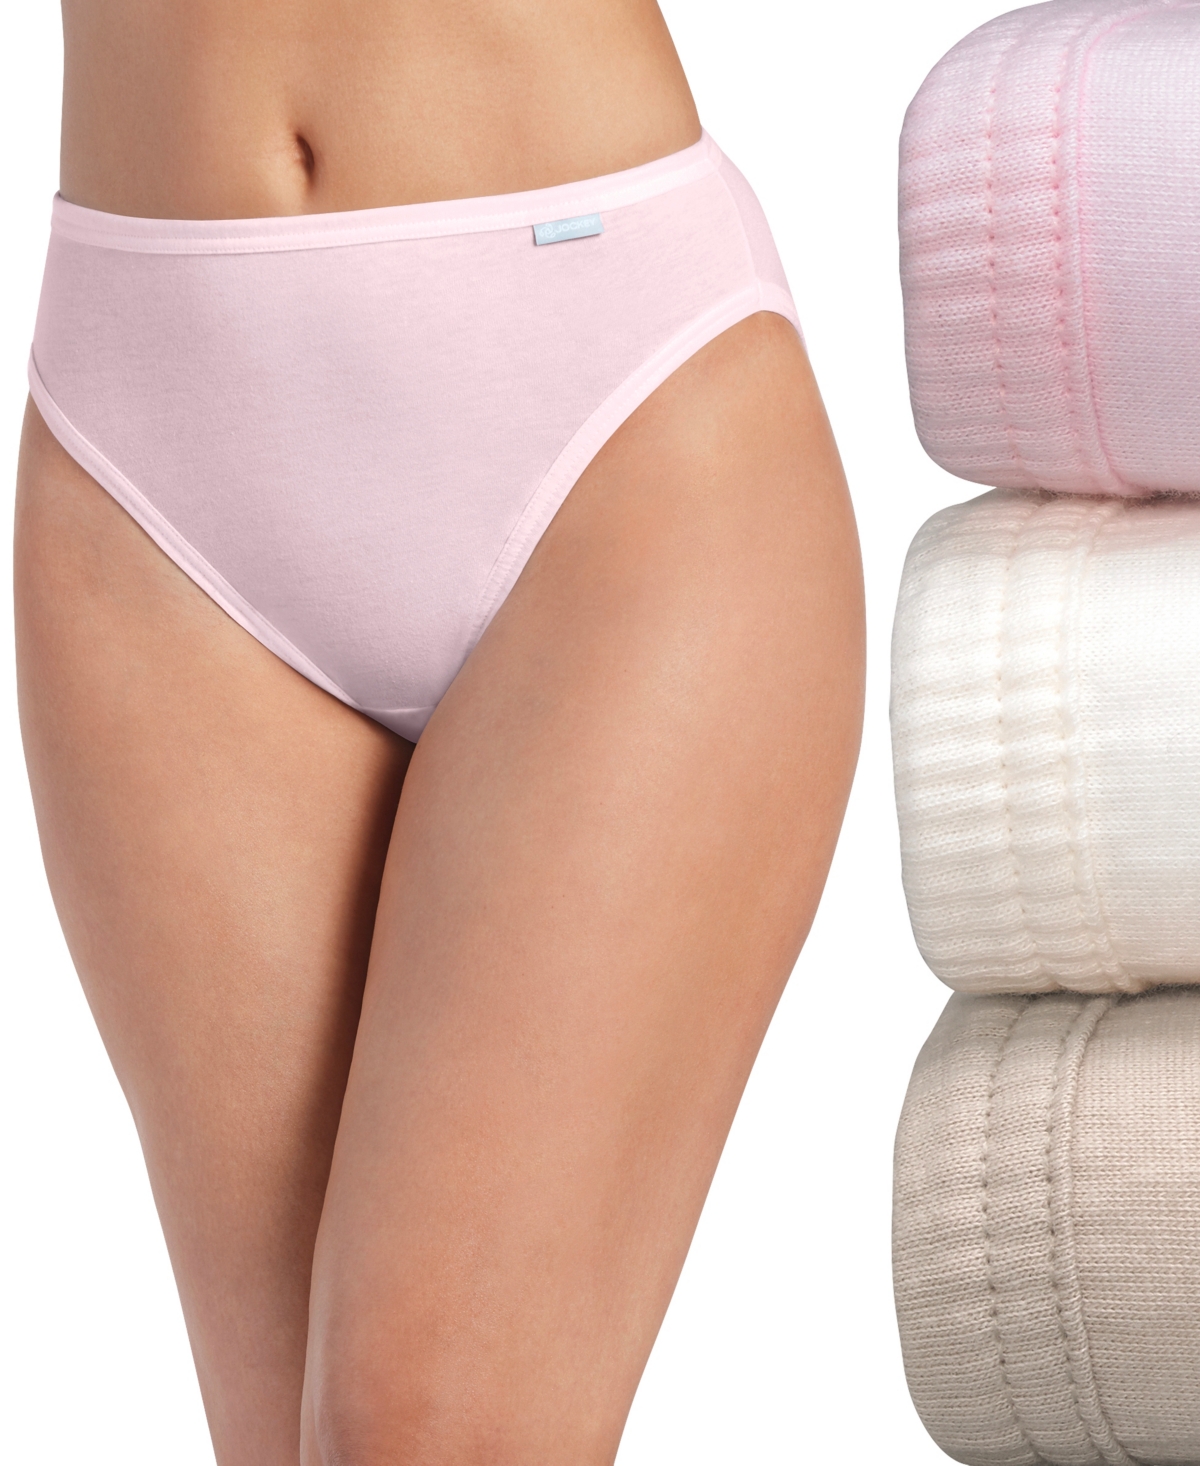 Jockey Elance French Cut 3 Pack Underwear 1485 1487, Extended Sizes In Ivory,sand,pink Pearl